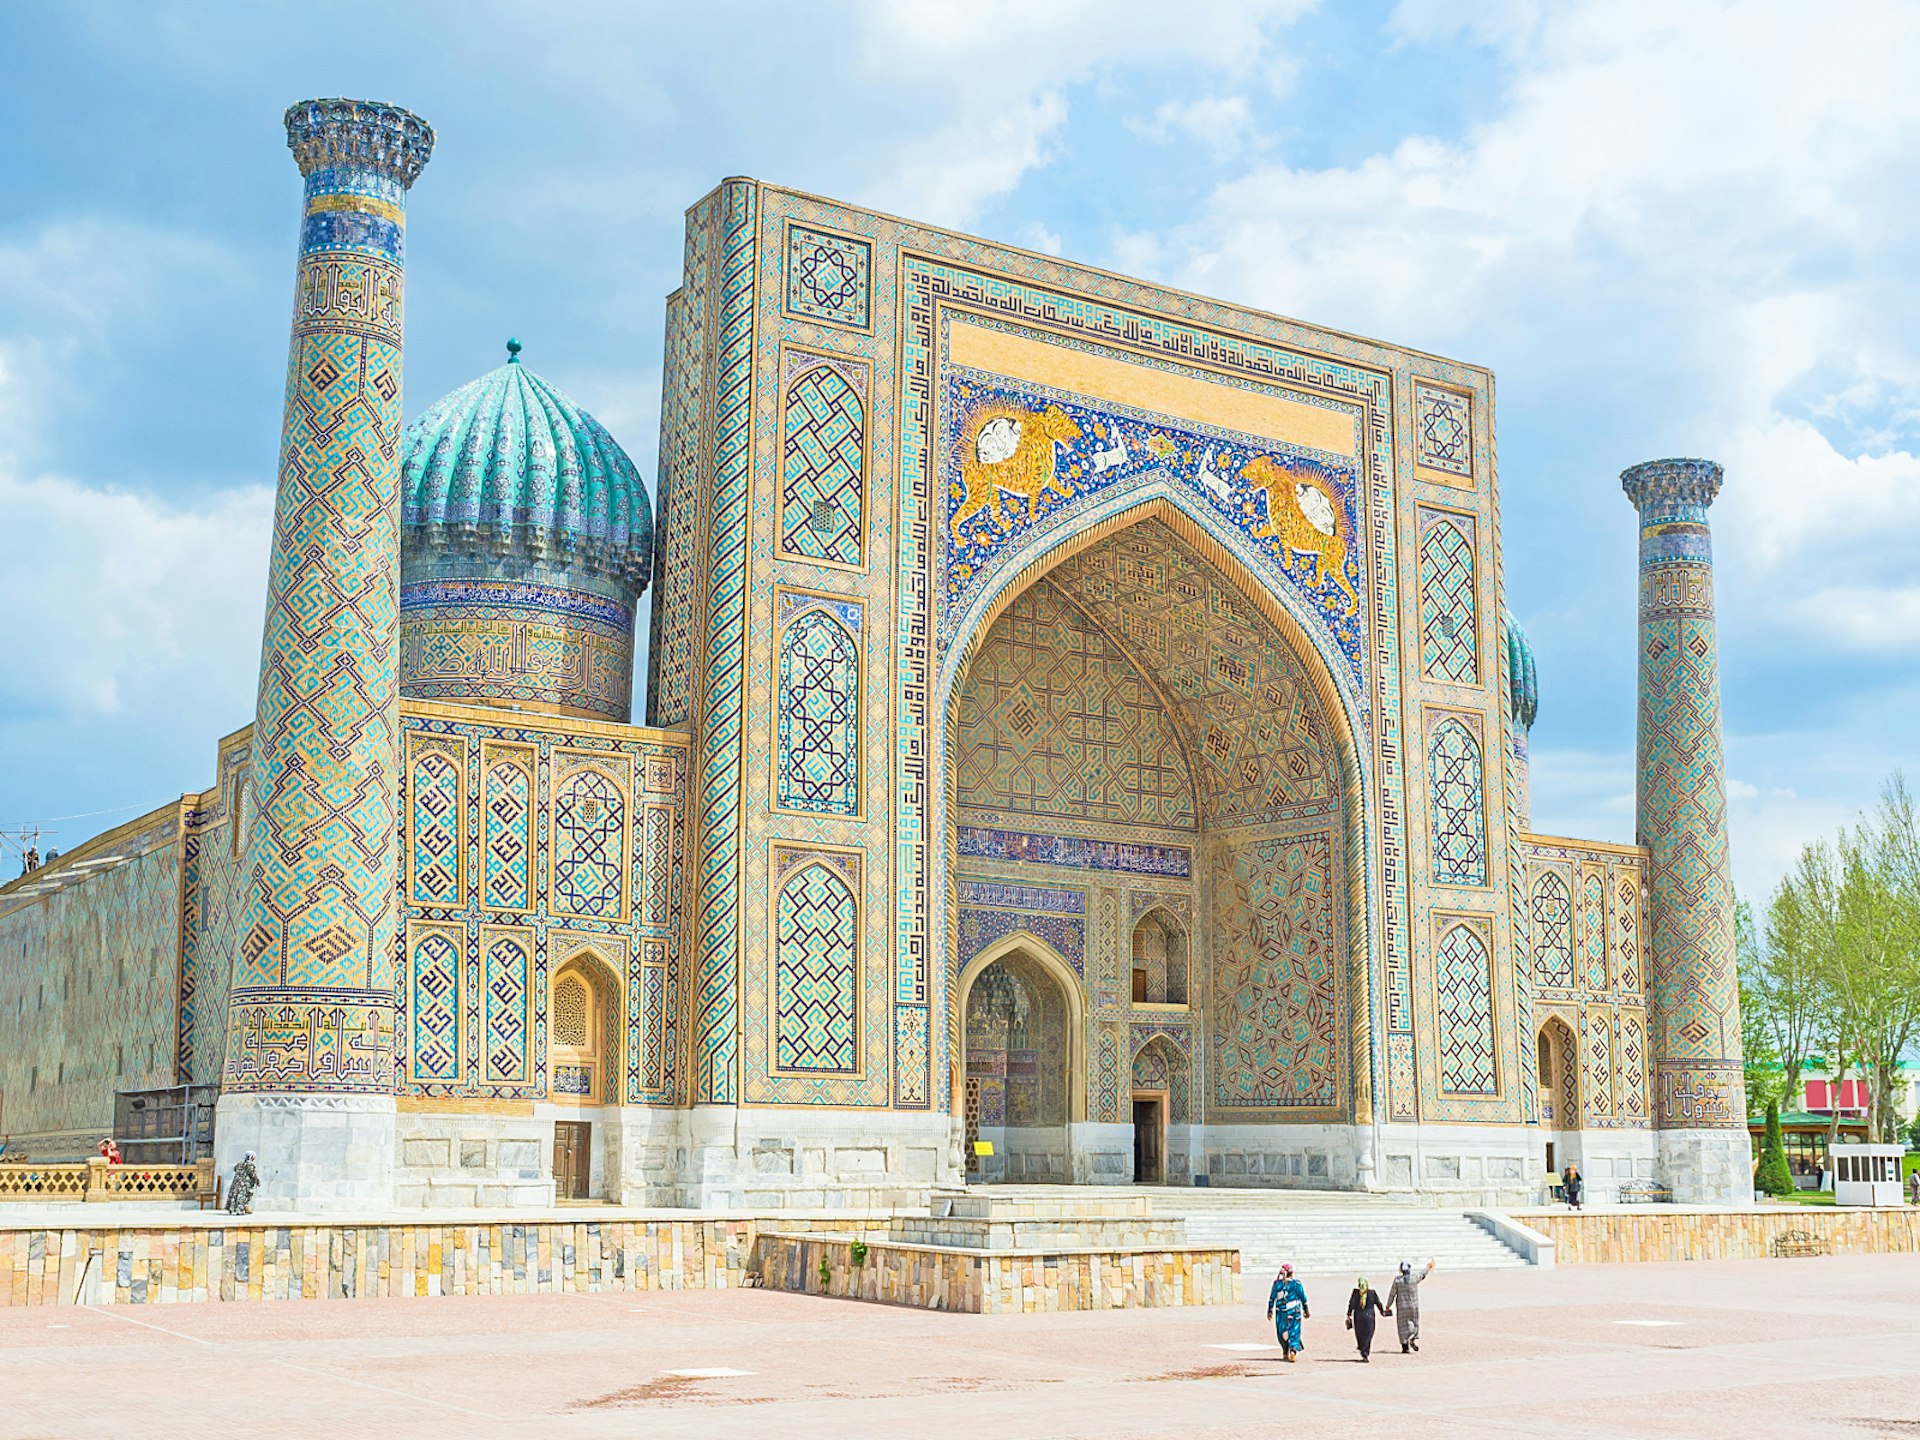 Minarets flank the square entrance to this building, which is covered in tiles of turquoise, blue and yellow. There's a turquoise dome at the back